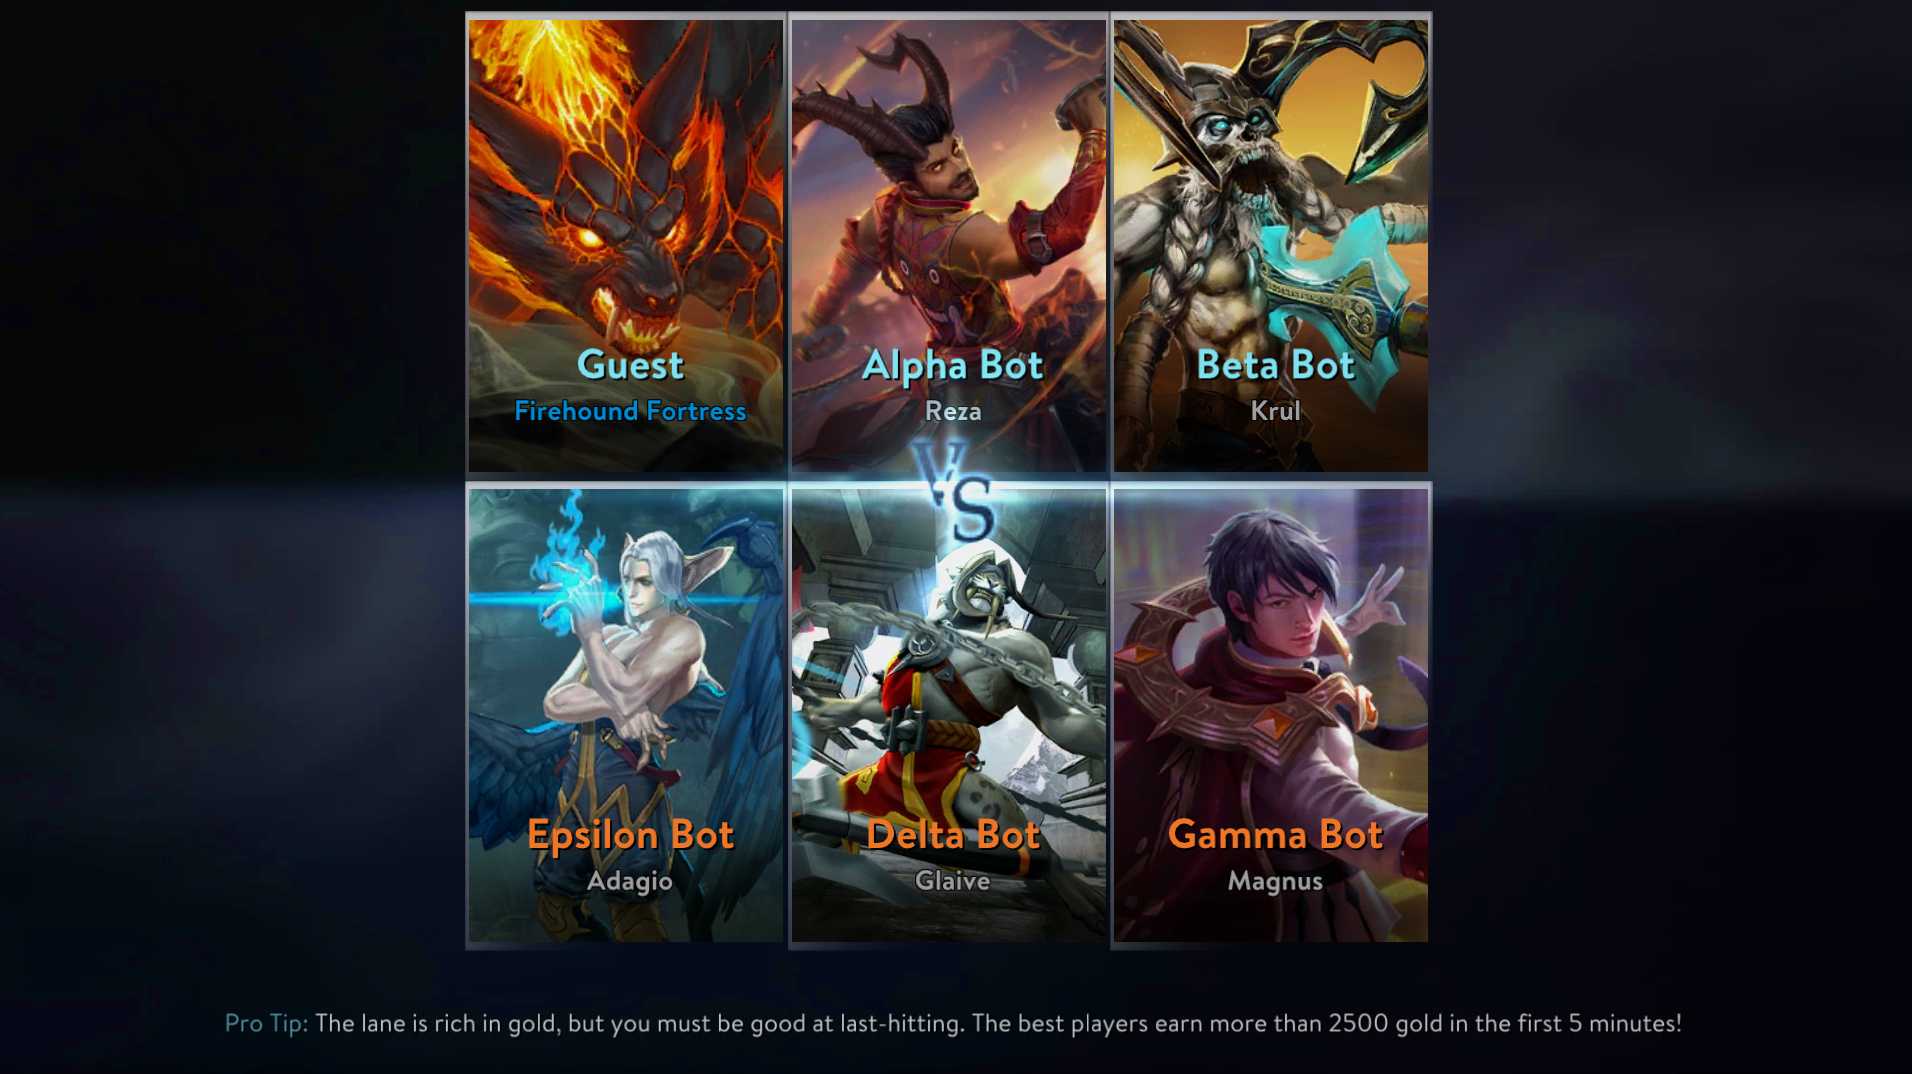 A match being loaded in Vainglory